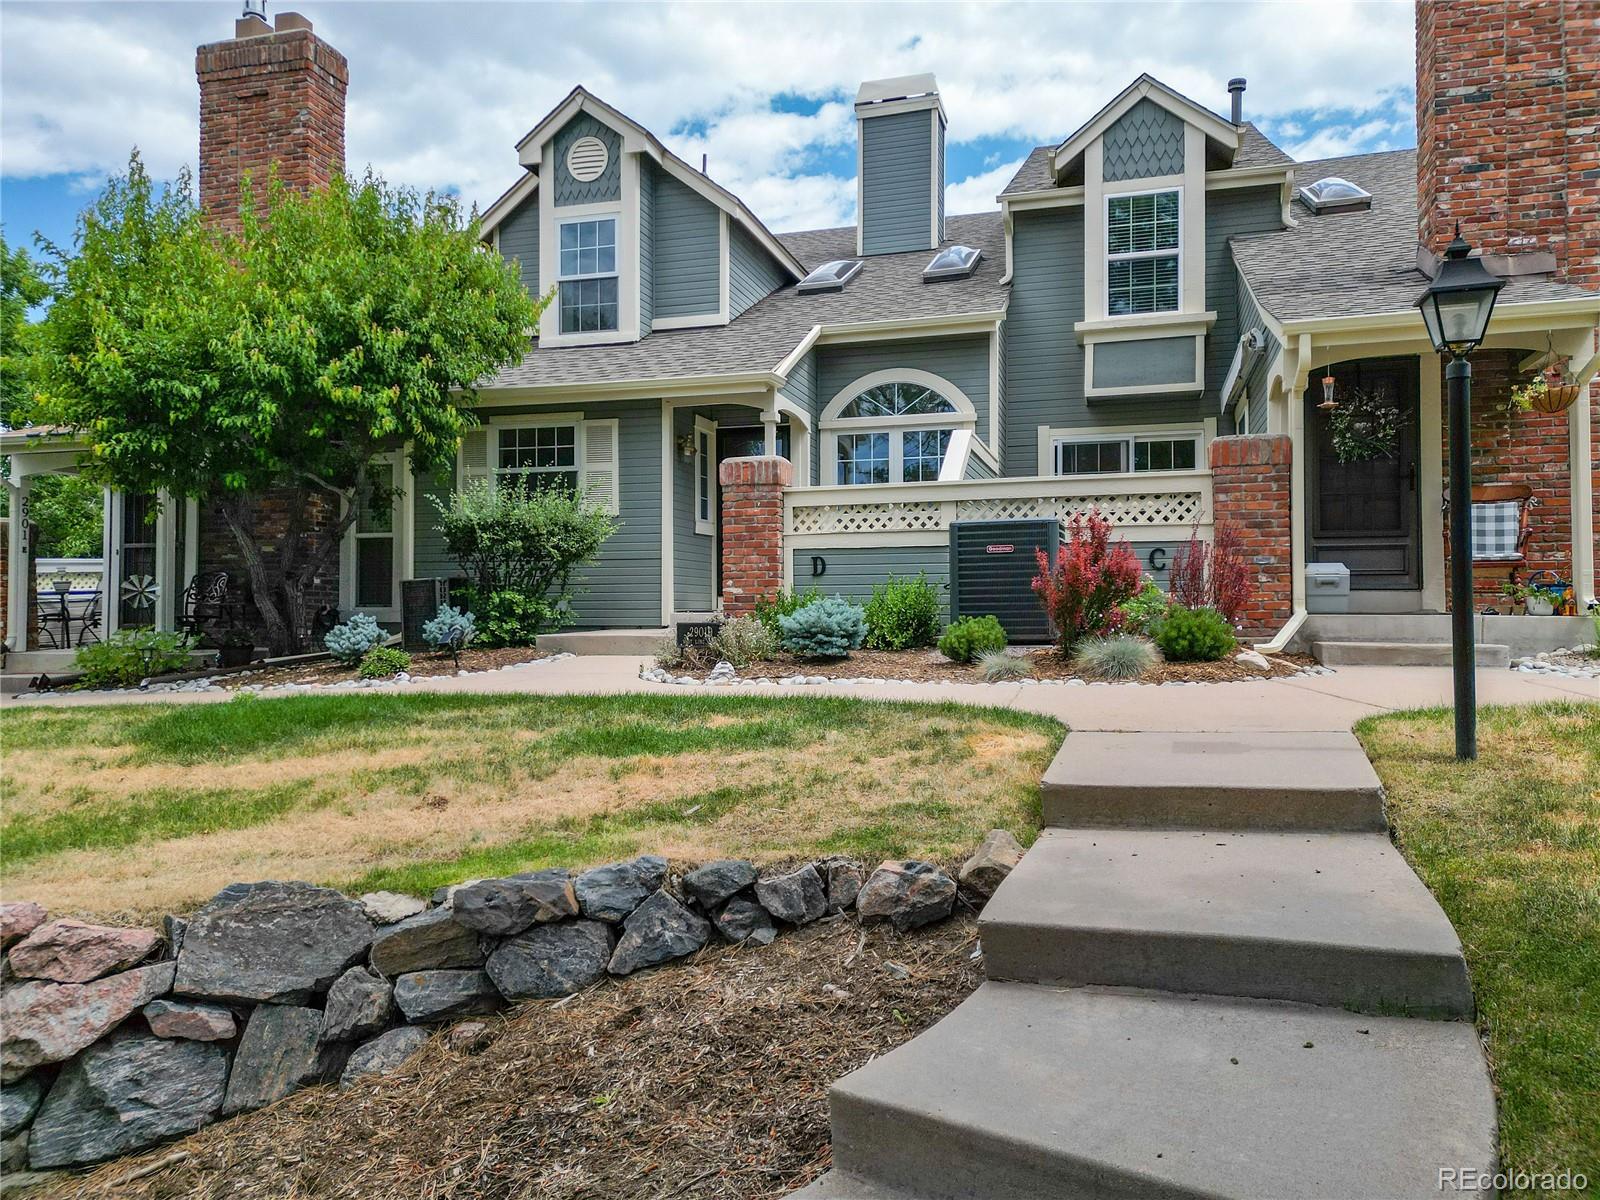 Report Image for 2901 W Long Circle,Littleton, Colorado